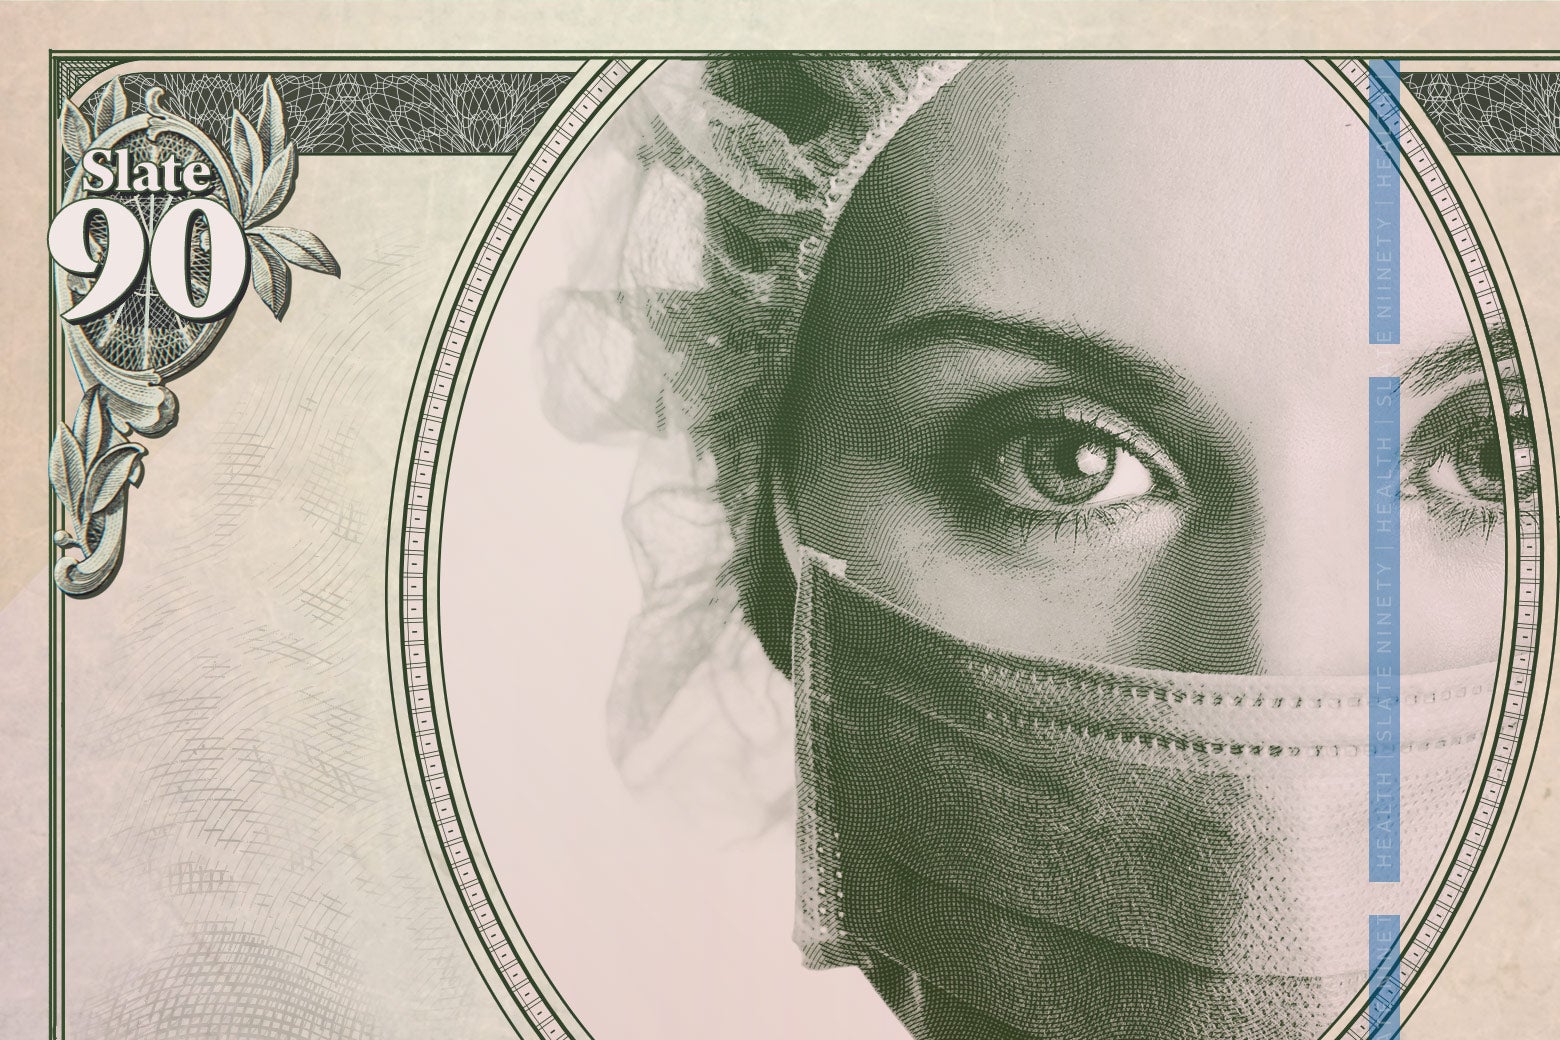 Photo illustration: a Slate 90 modified bill with an image of a surgically masked woman in the center.